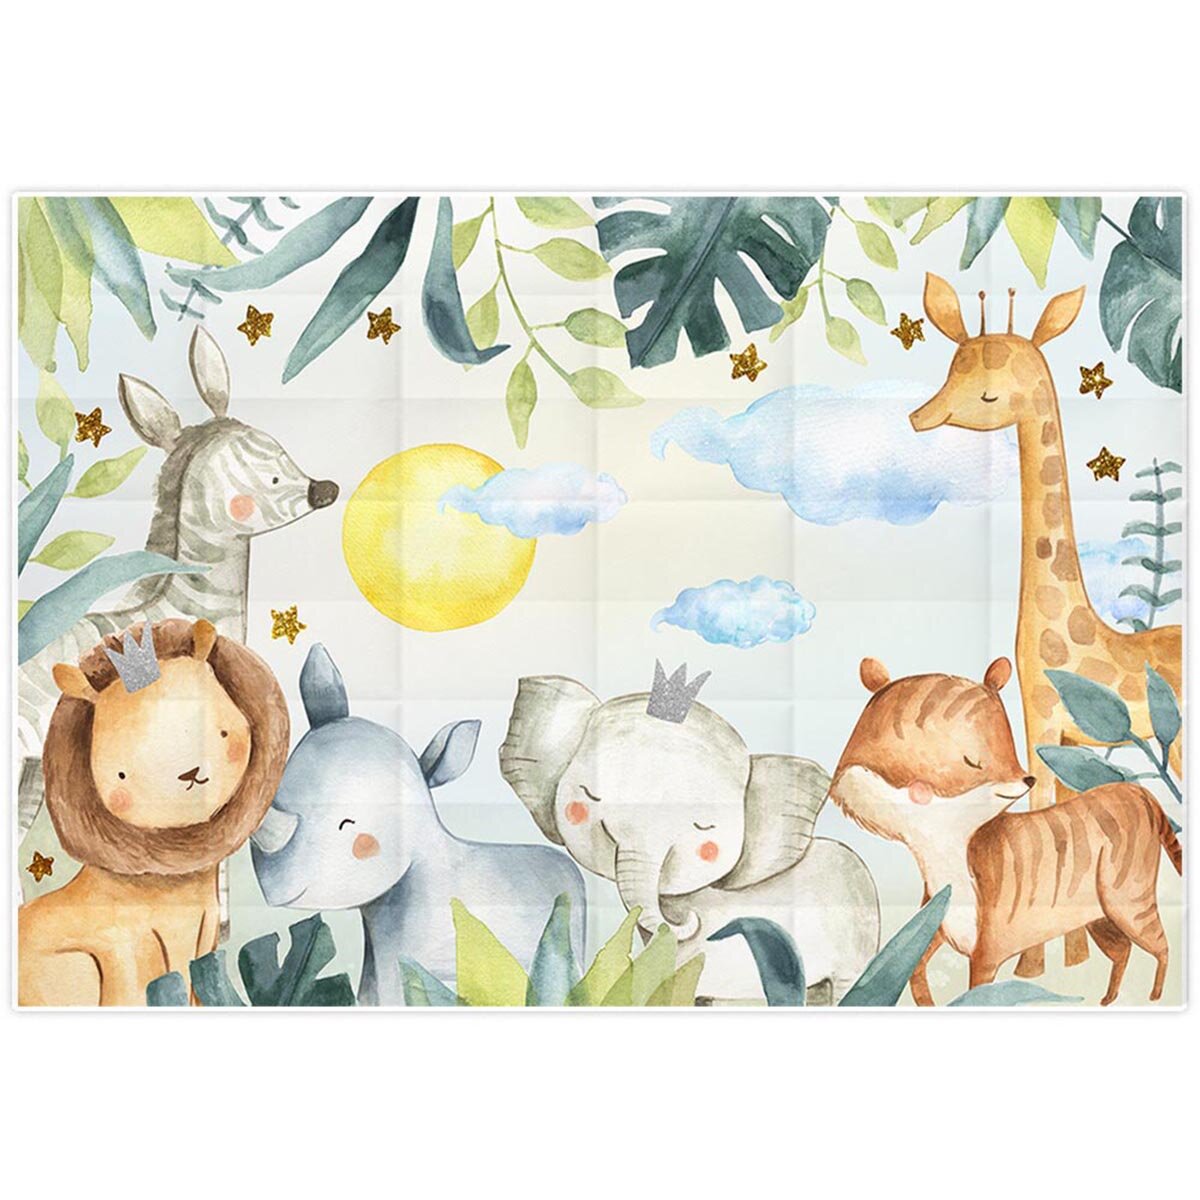 

5x3FT 7x5FT 9x6FT Cartoon Forest Animal Birthday Studio Photography Backdrops Background